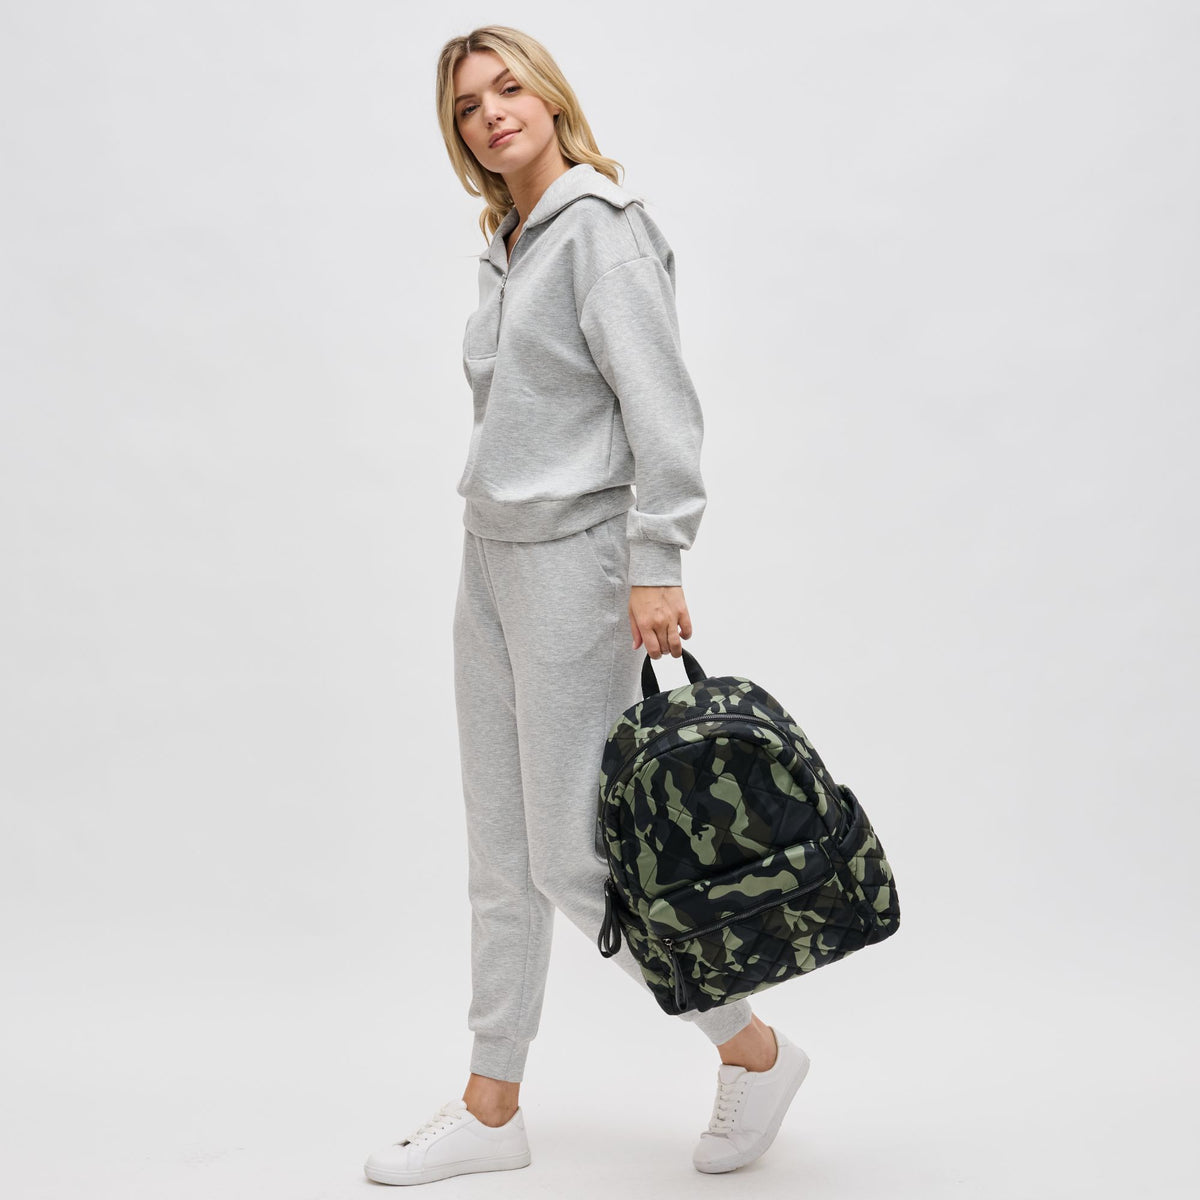 Woman wearing Camo Sol and Selene Motivator - Large Travel Backpack 841764106580 View 4 | Camo